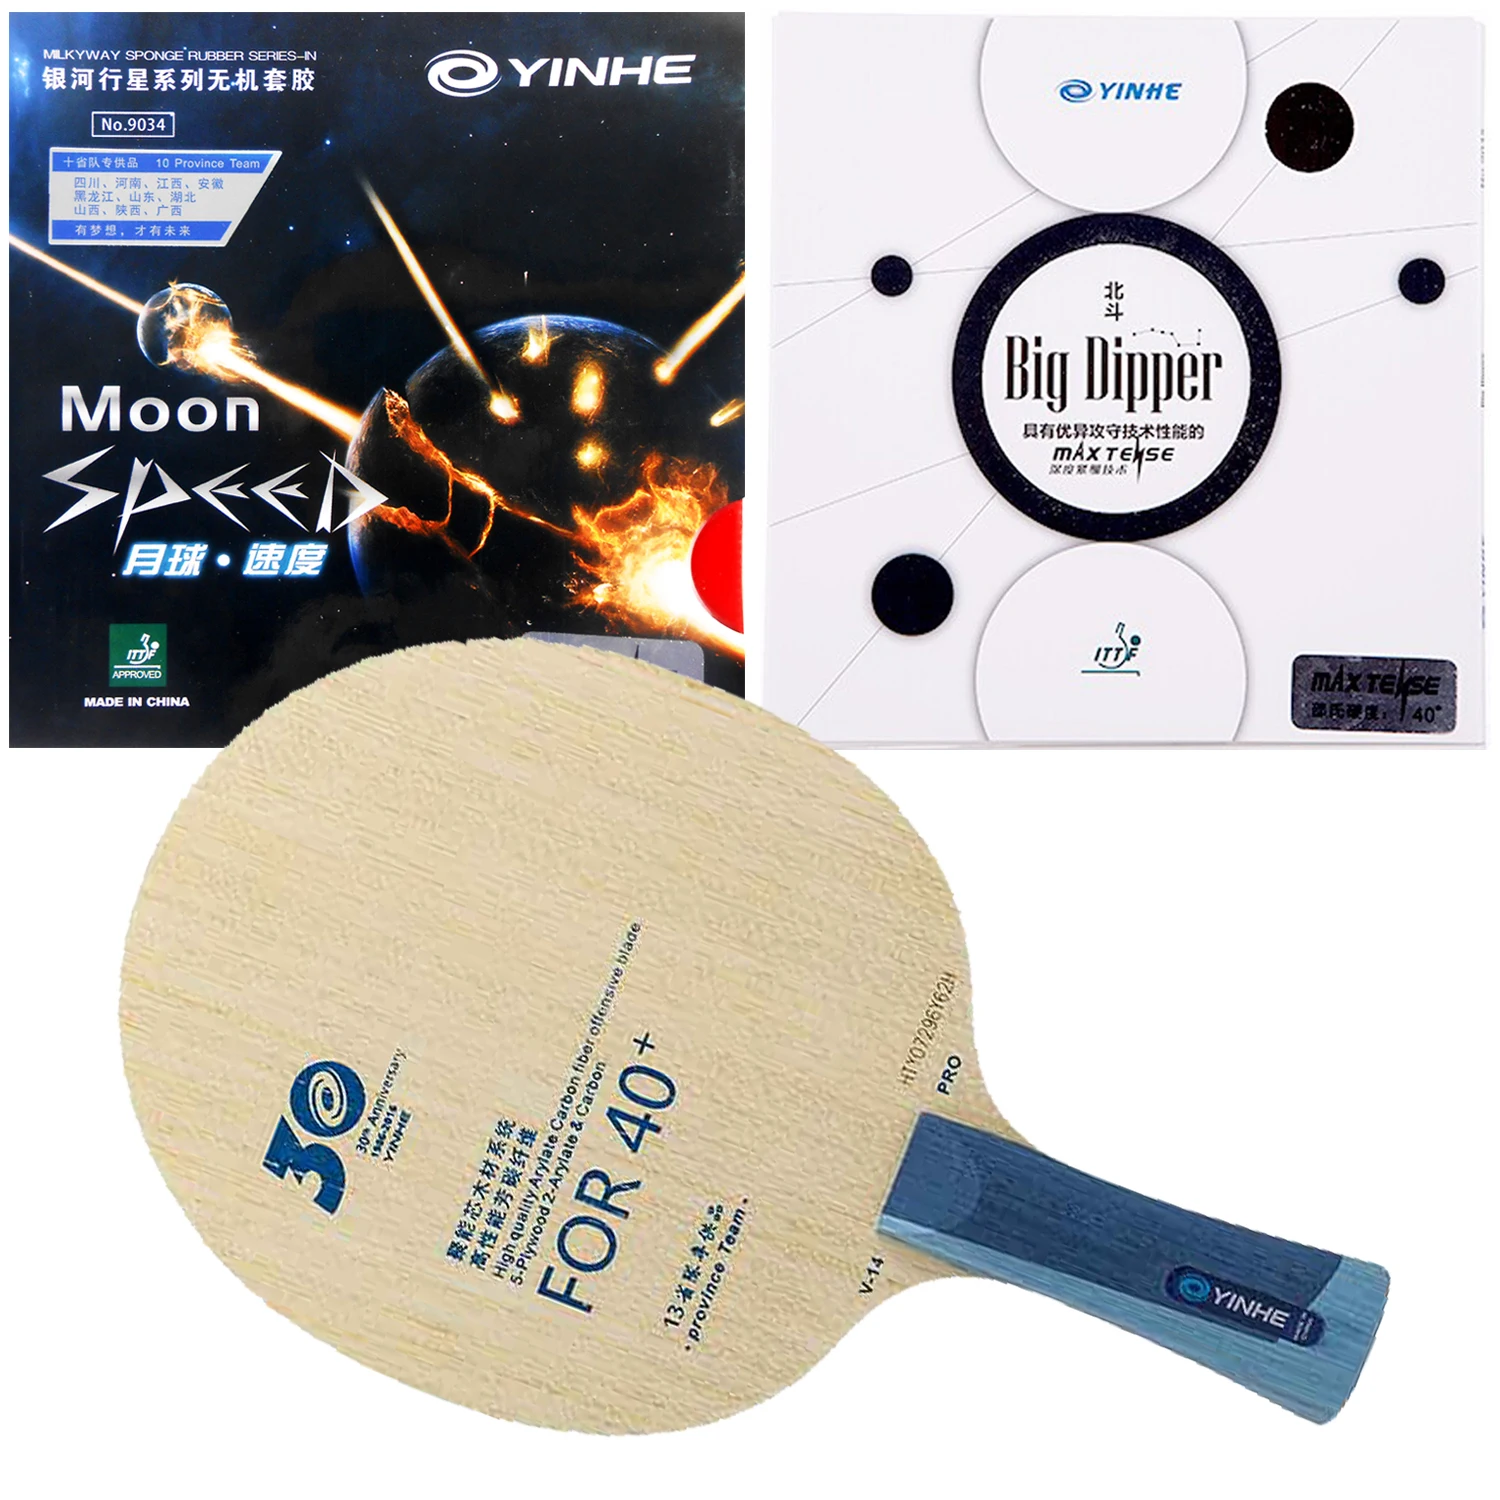 Yinhe 30th Anniversary Version pro V14 V-14 pro table tennis Blade for new material 40+ with Moon Speed Big Dipper